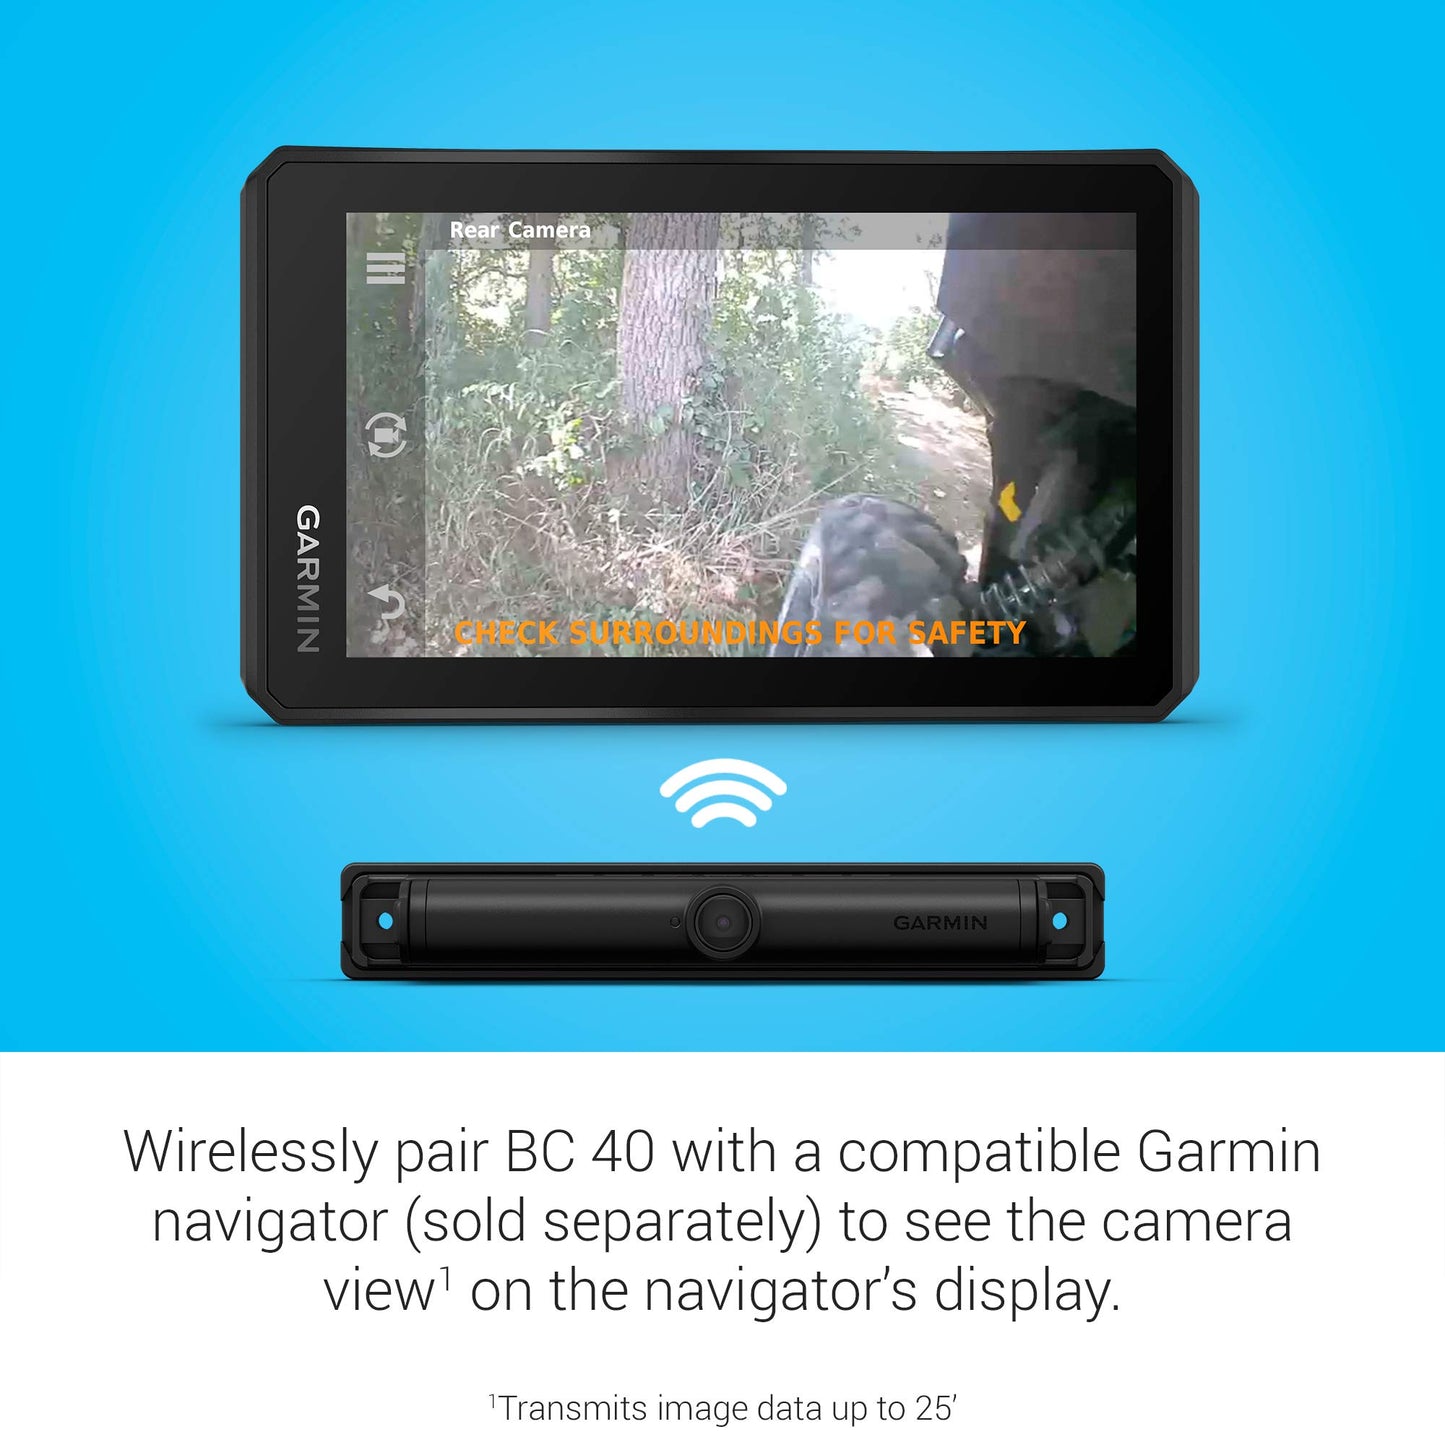 Garmin BC 40 Wireless Camera with Tube Mount, Attaches to Roll Cage or Flat Panel, Rugged for Off-Road Conditions